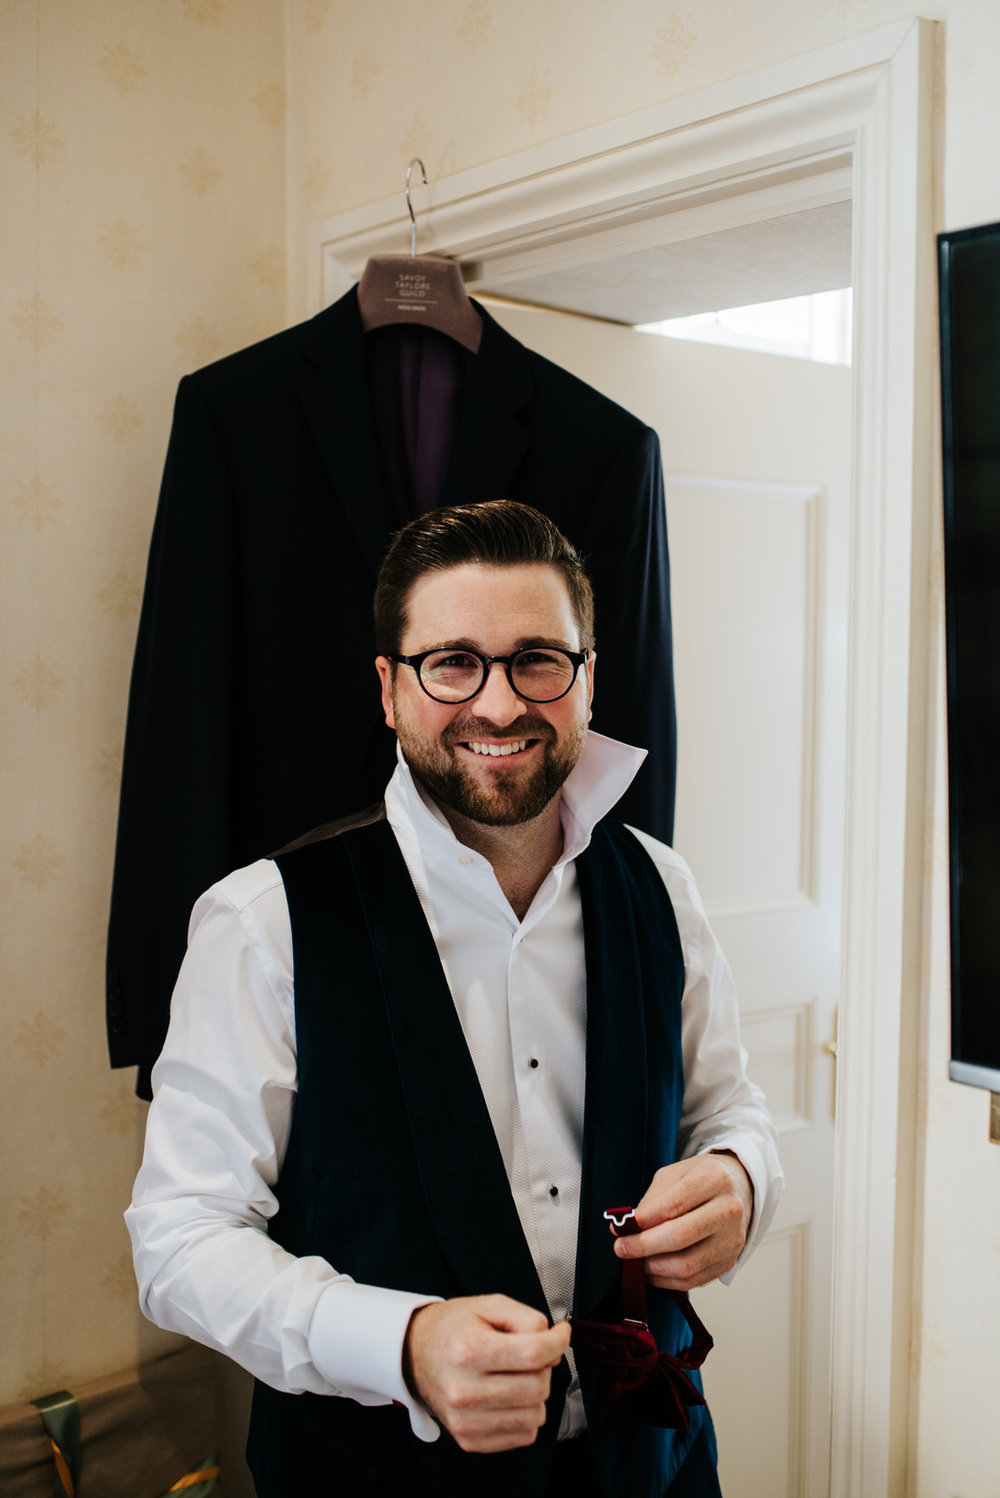 Groom smiles at camera as he buttons up his shirt